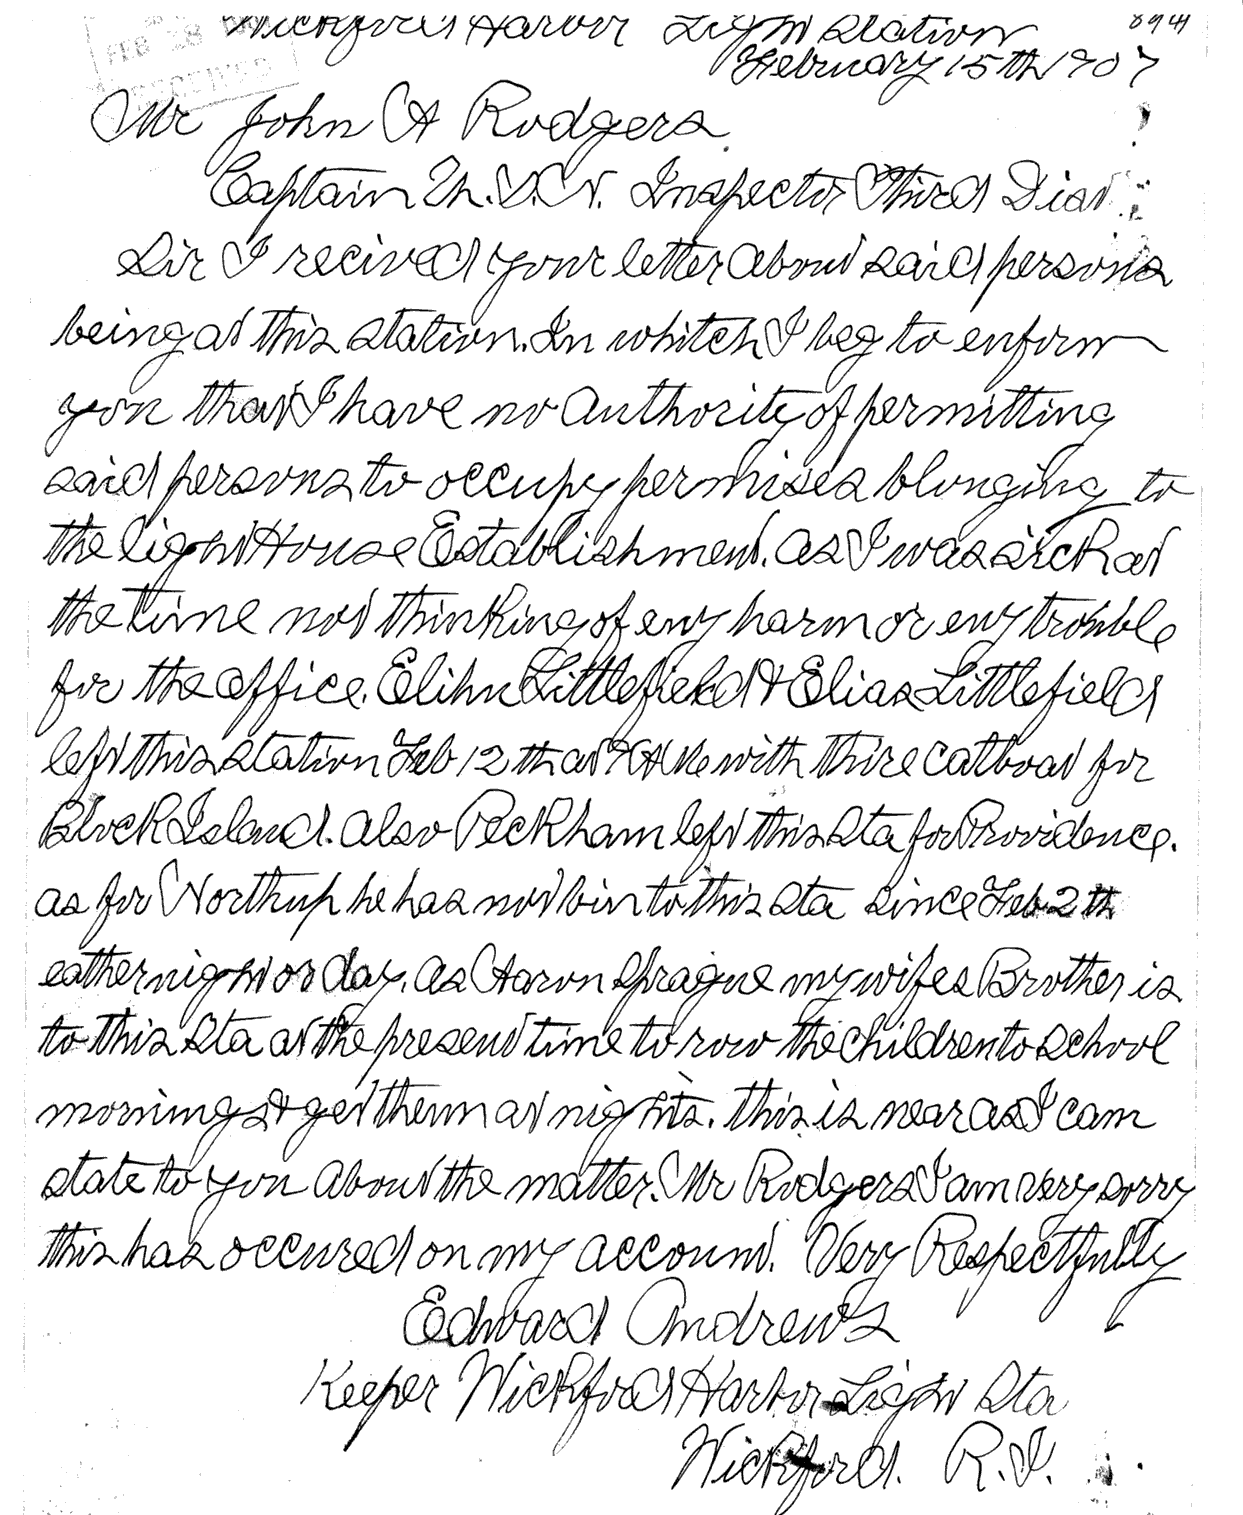 Wickford Harbor Light - Keeper's Letter to Light-house Establishment - page 2